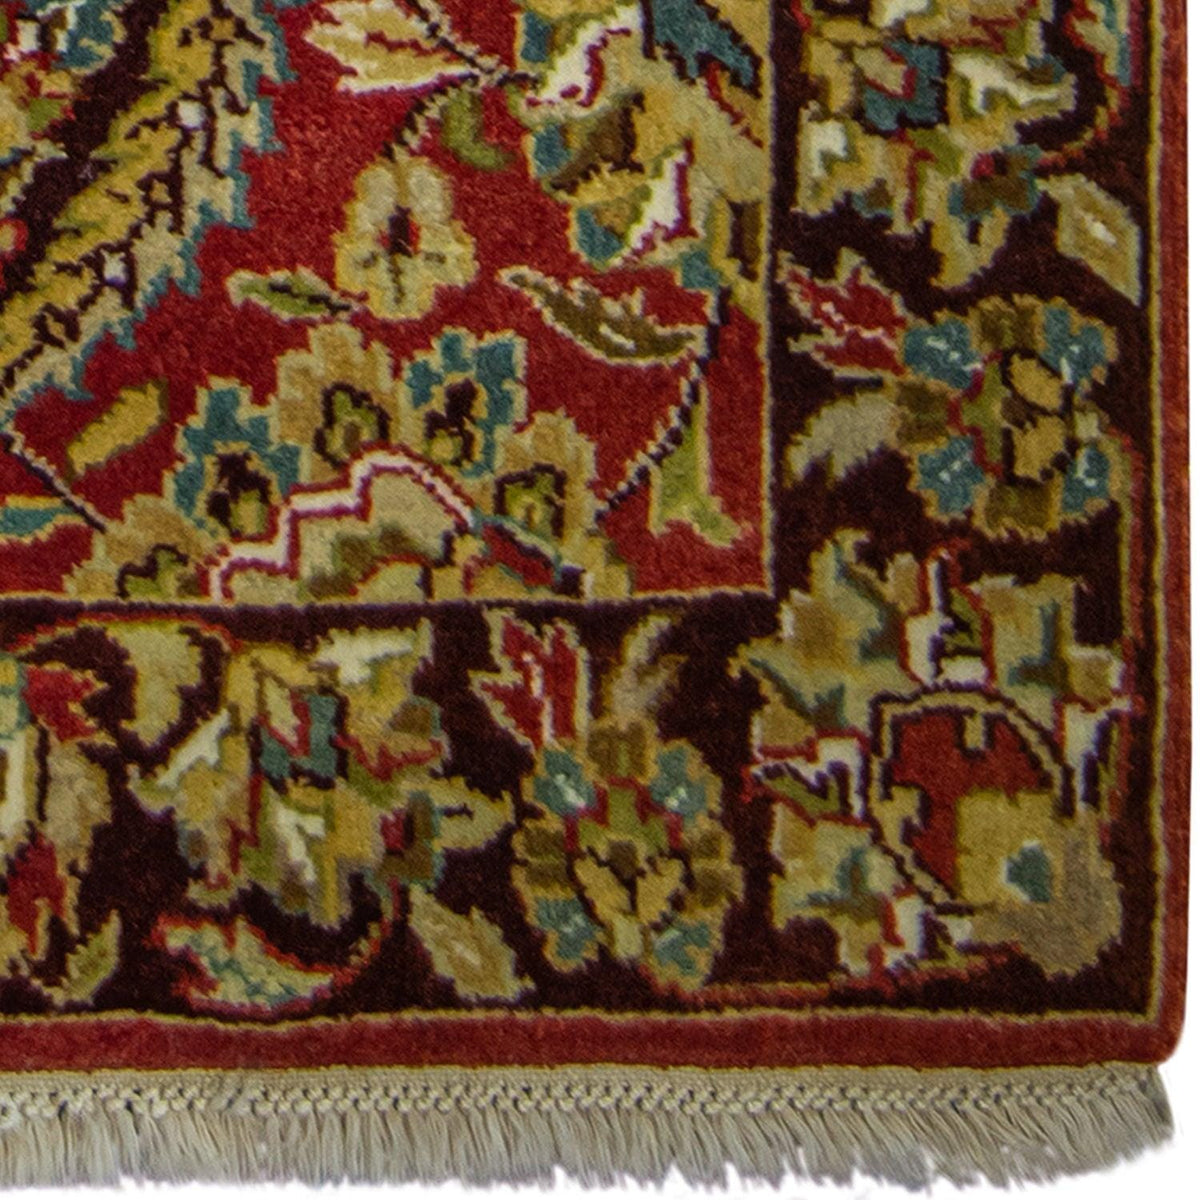 Fine Hand-knotted Floral Design Small Rug 67cm x 100cm